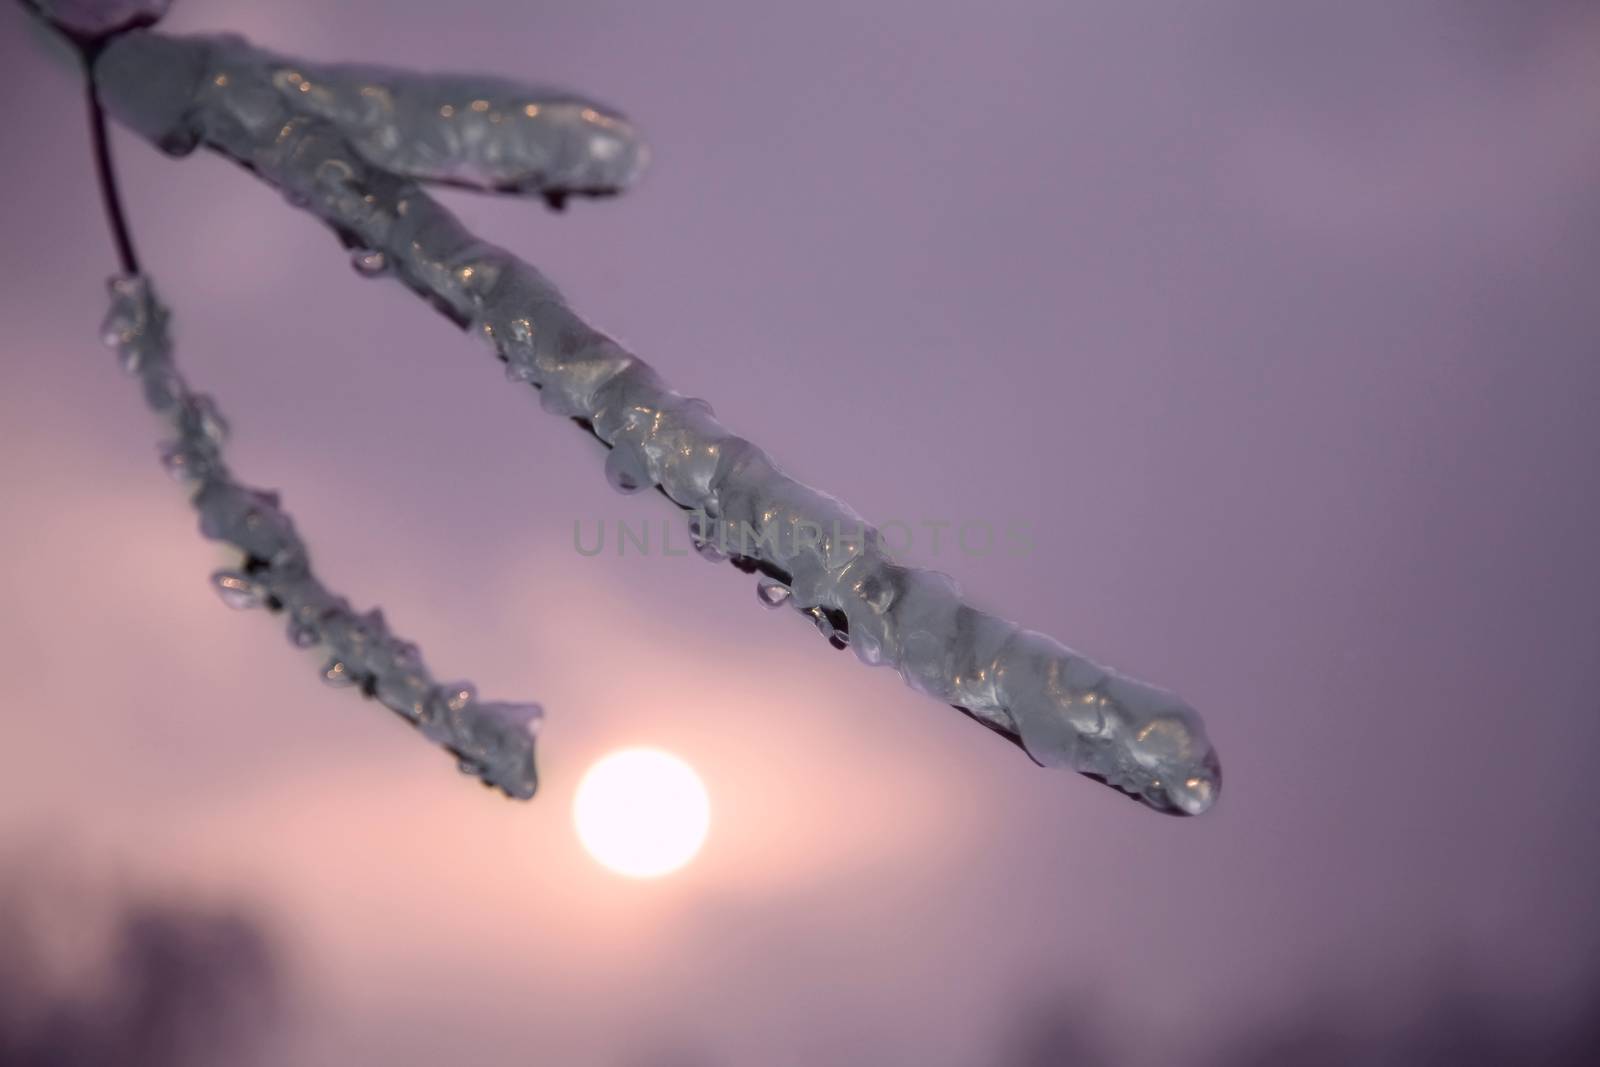  ice on twig of  tree by foryouinf